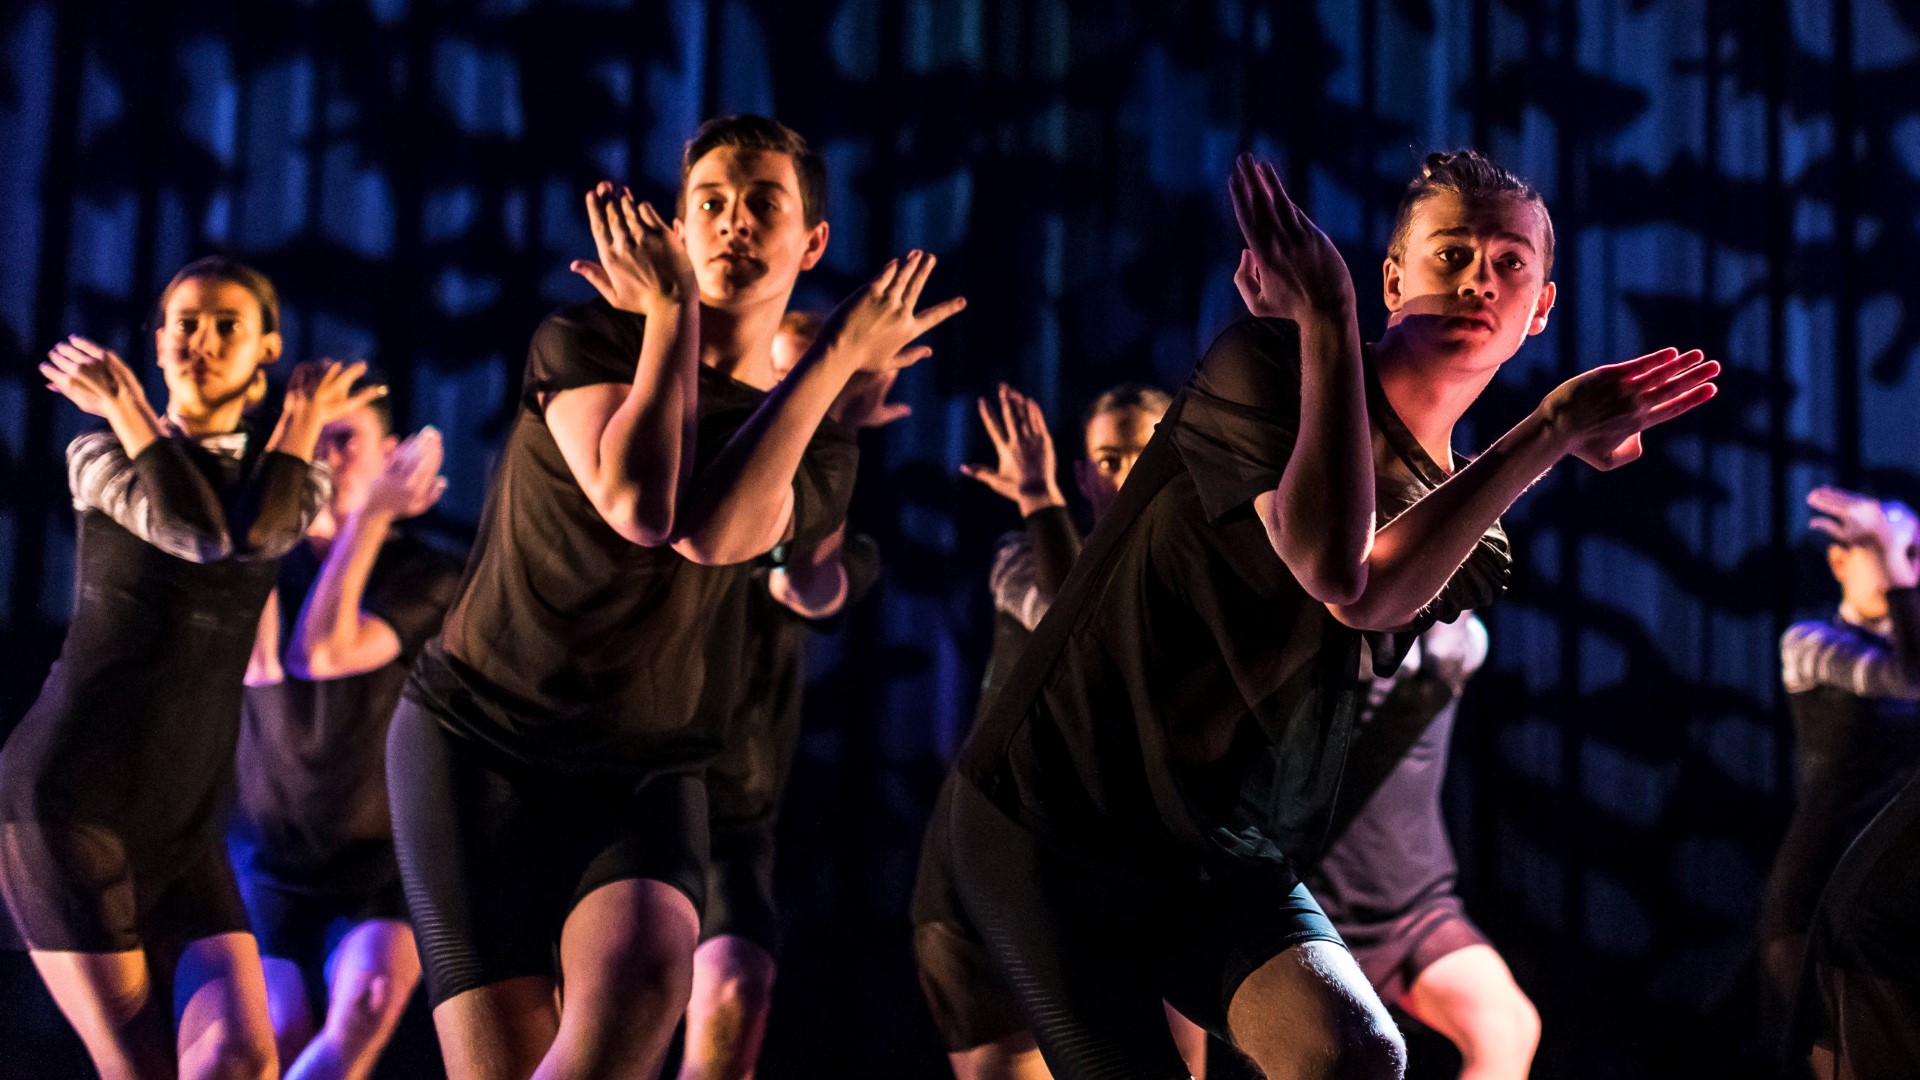 Excerpt of Unaipon, performed by the Aboriginal Dance Company at the State Dance Festival, 2019